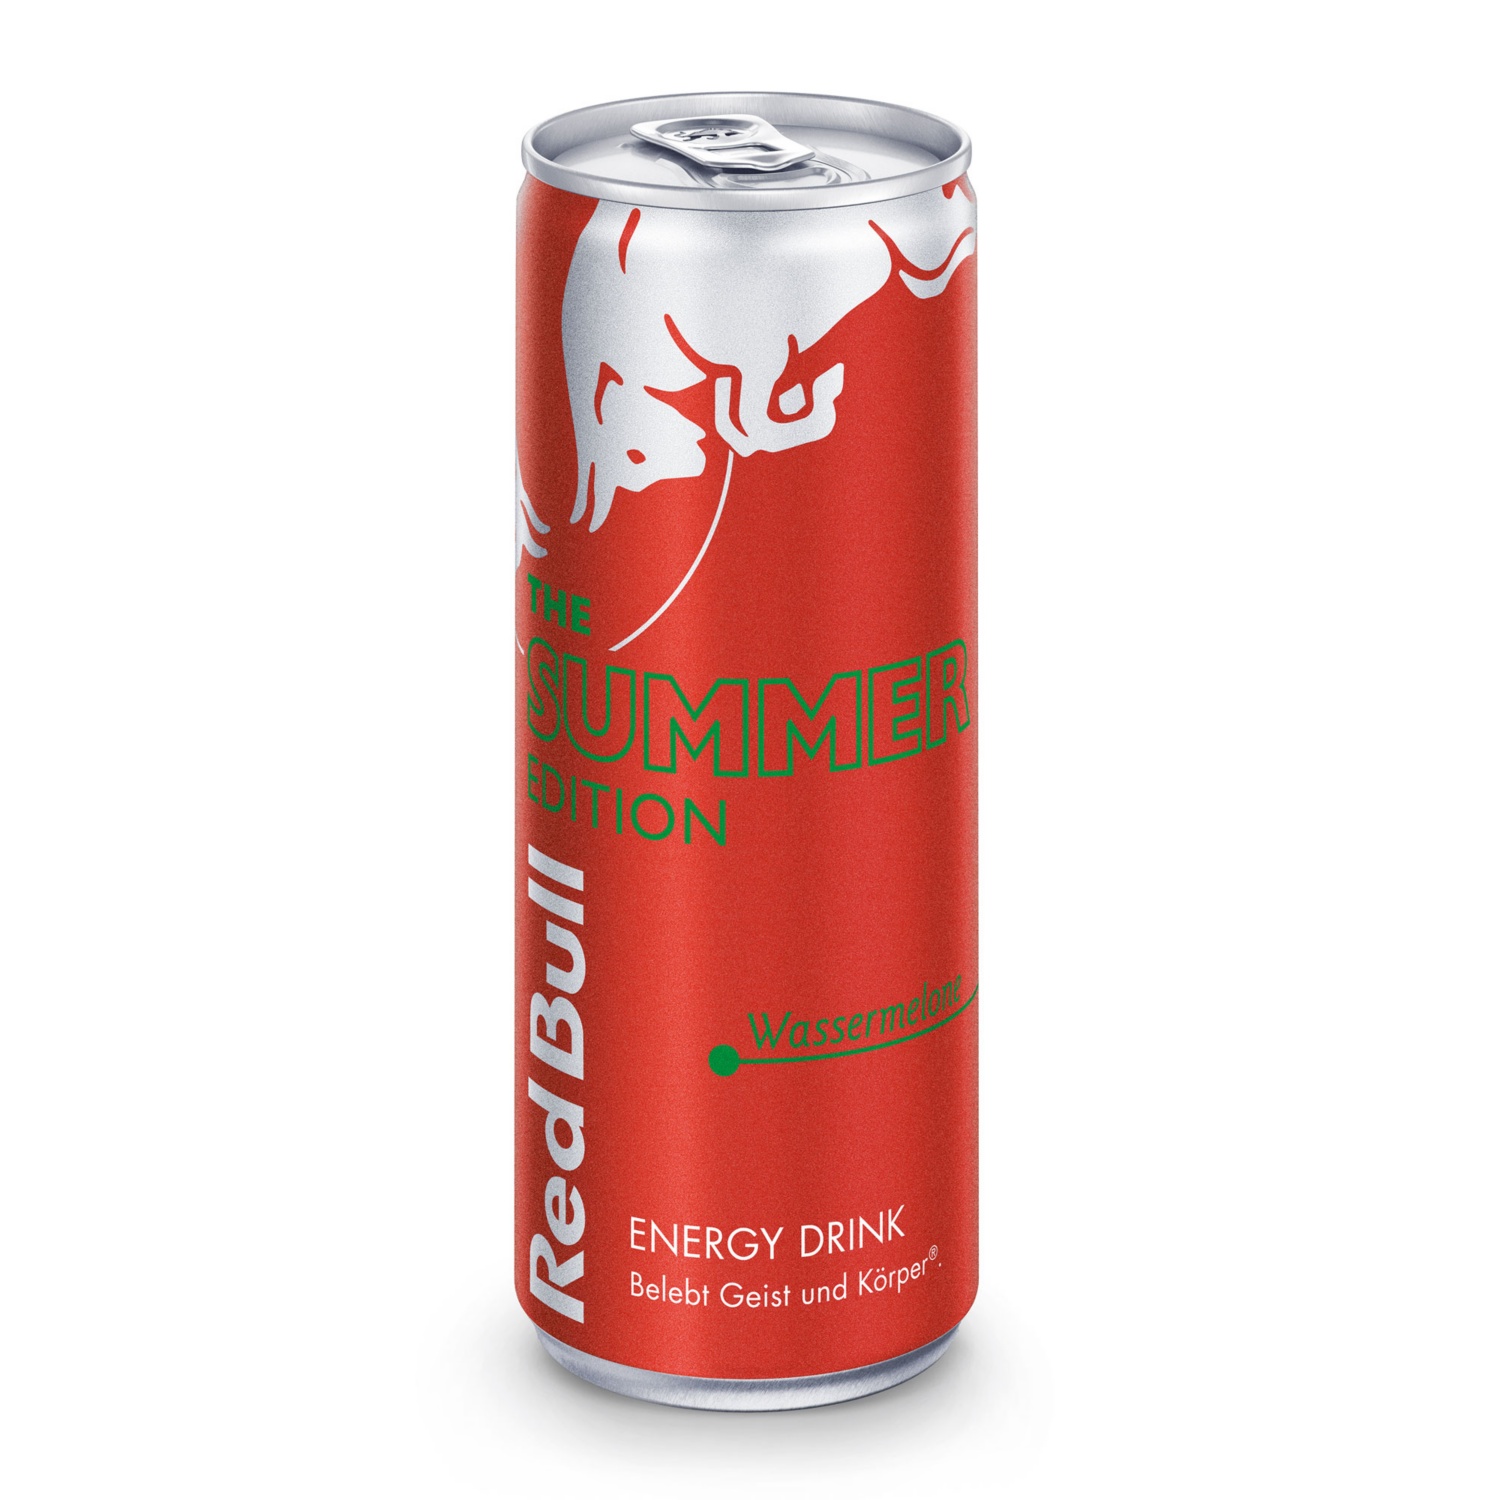 RED BULL Limited Edition, Wassermelone